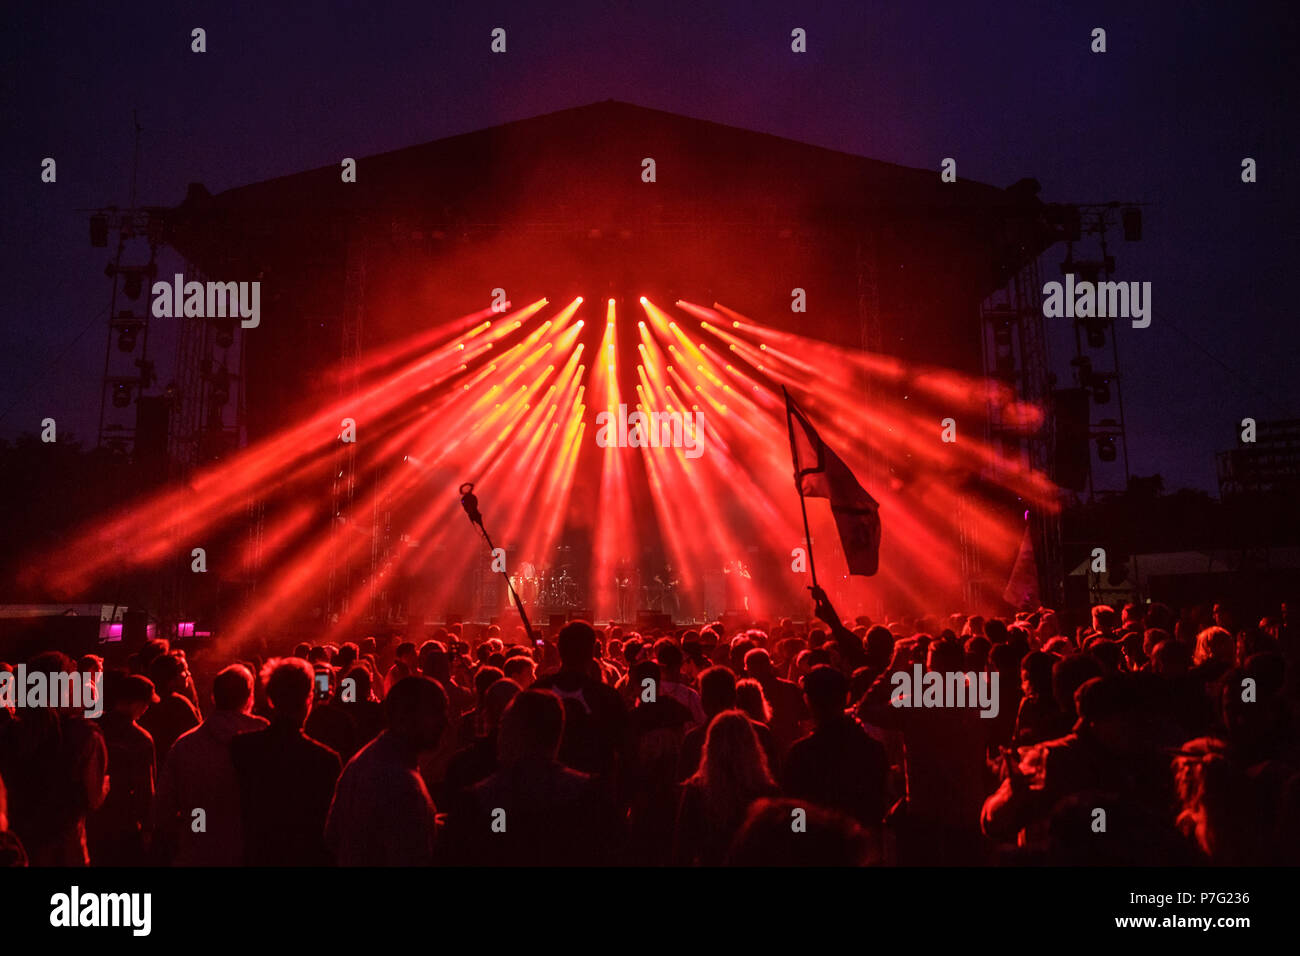 Denmark, Roskilde - July 5, 2018. The Colombian electronic music act El Leopardo performs a live concert during the Danish music festival Roskilde Festival 2018. (Photo credit: Gonzales Photo - Peter Troest). Credit: Gonzales Photo/Alamy Live News Stock Photo